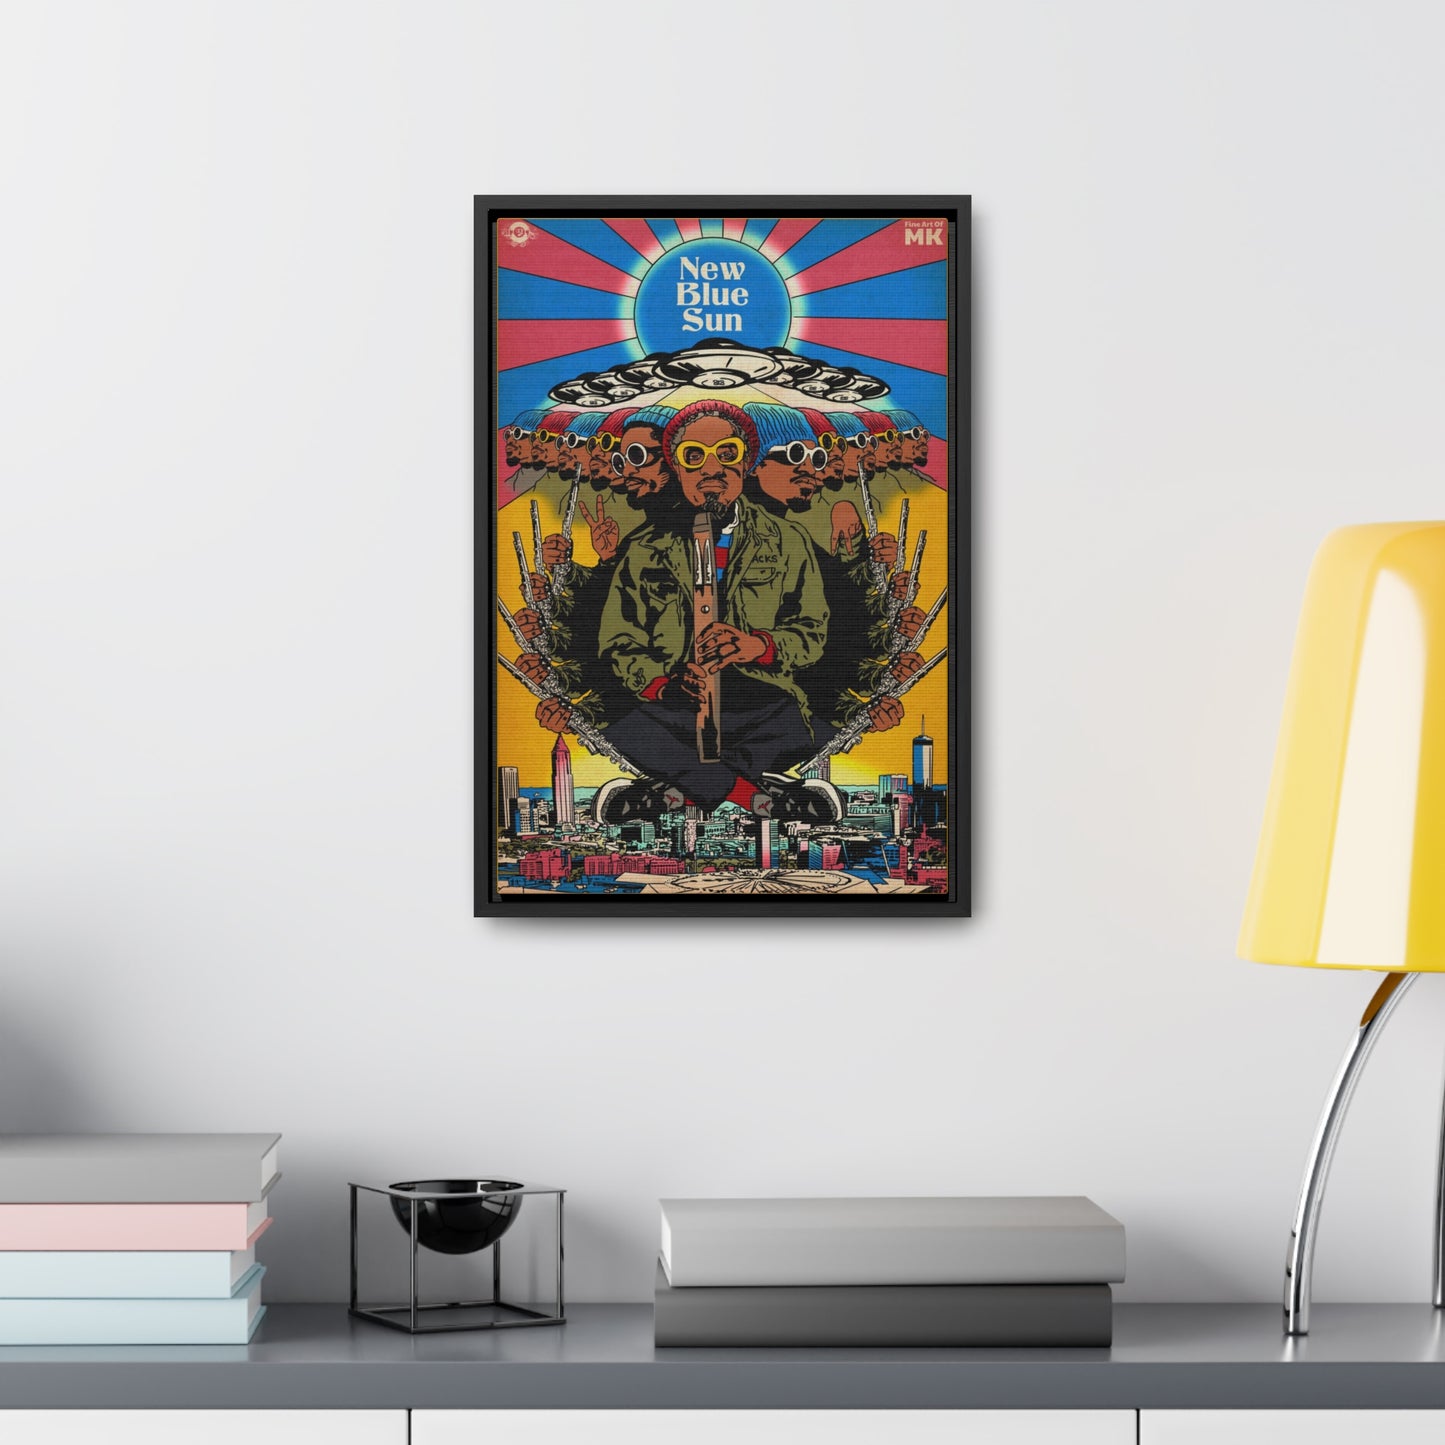 Andre 3000 - New Blue Sun -  Gallery Canvas Wraps, Vertical Frame